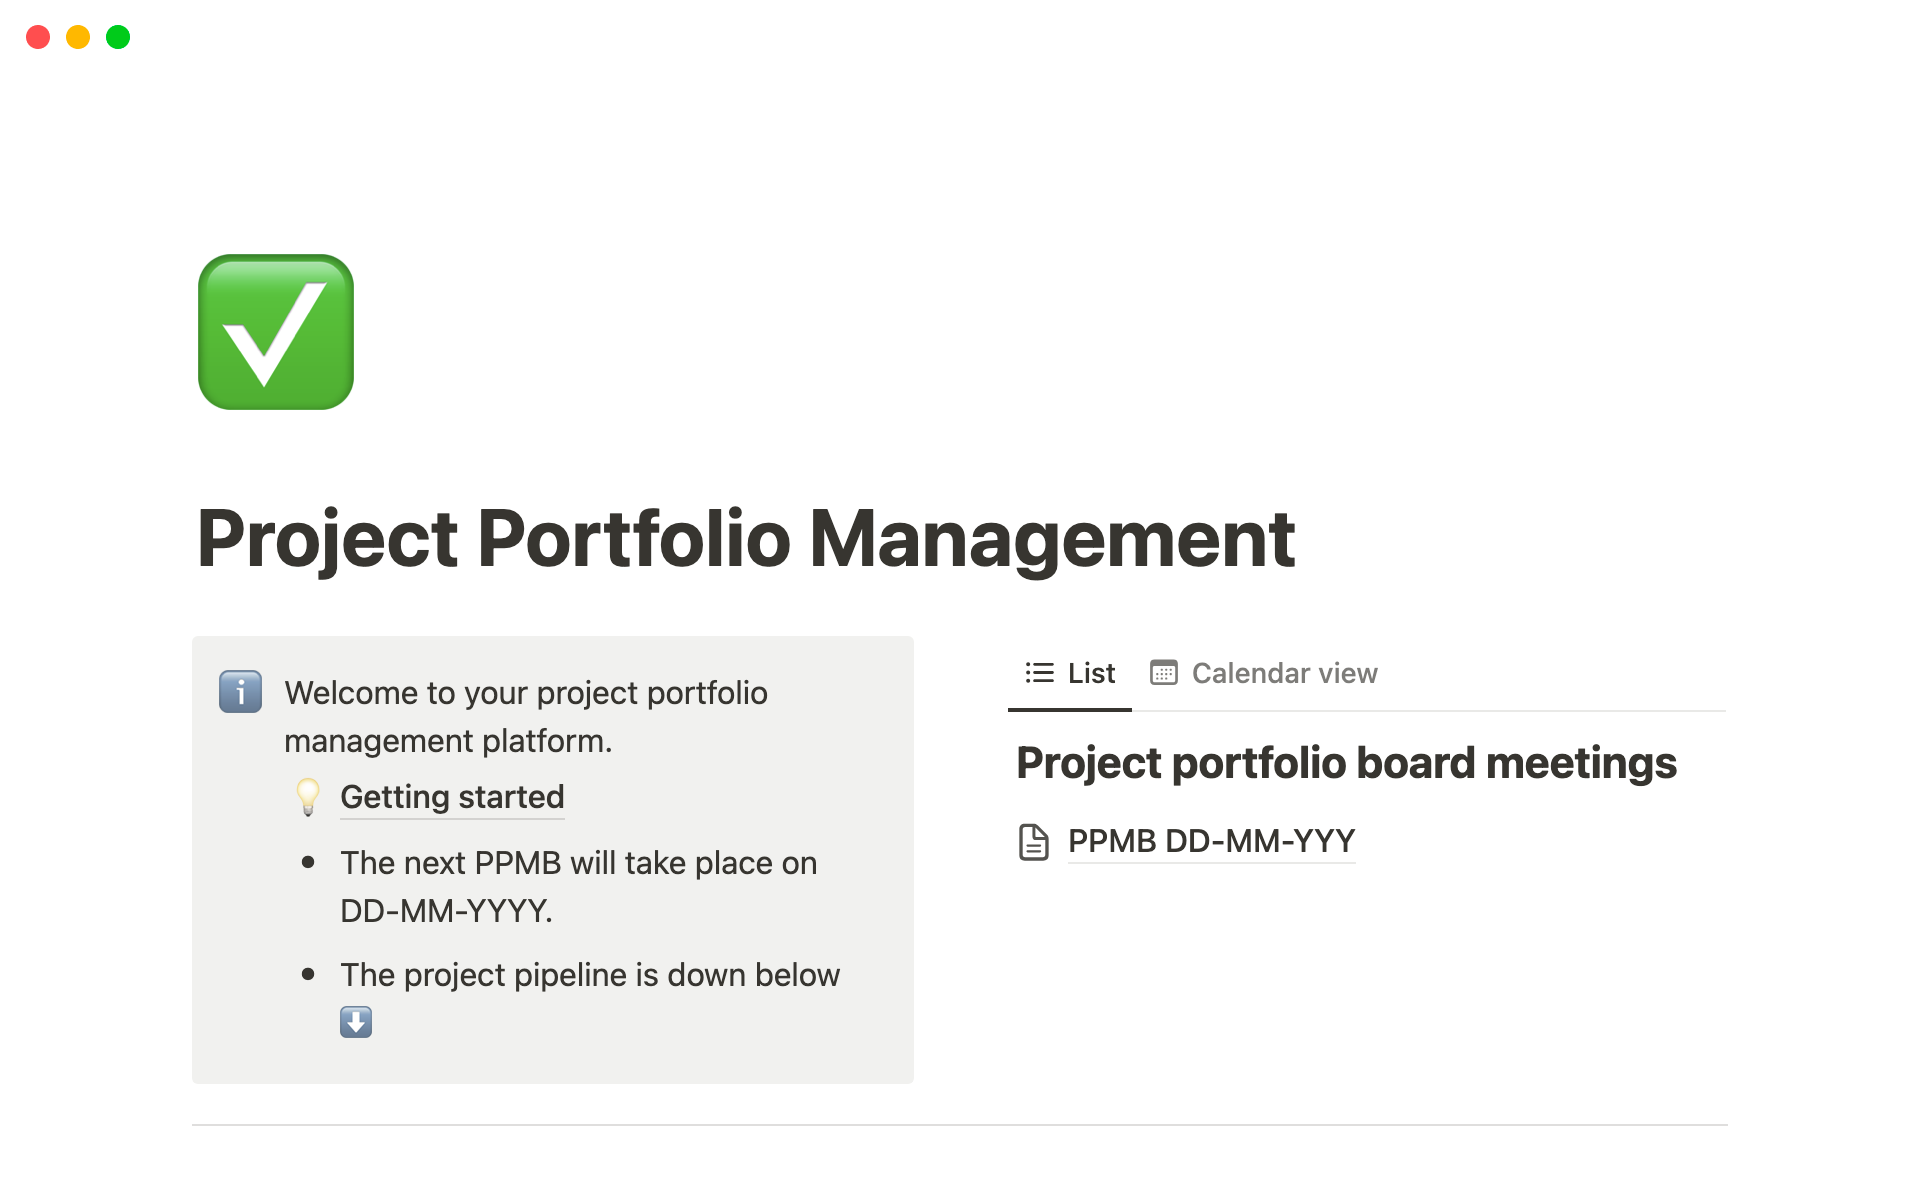 Project portfolio management, including organising project portfolio board meetings and providing project templates.